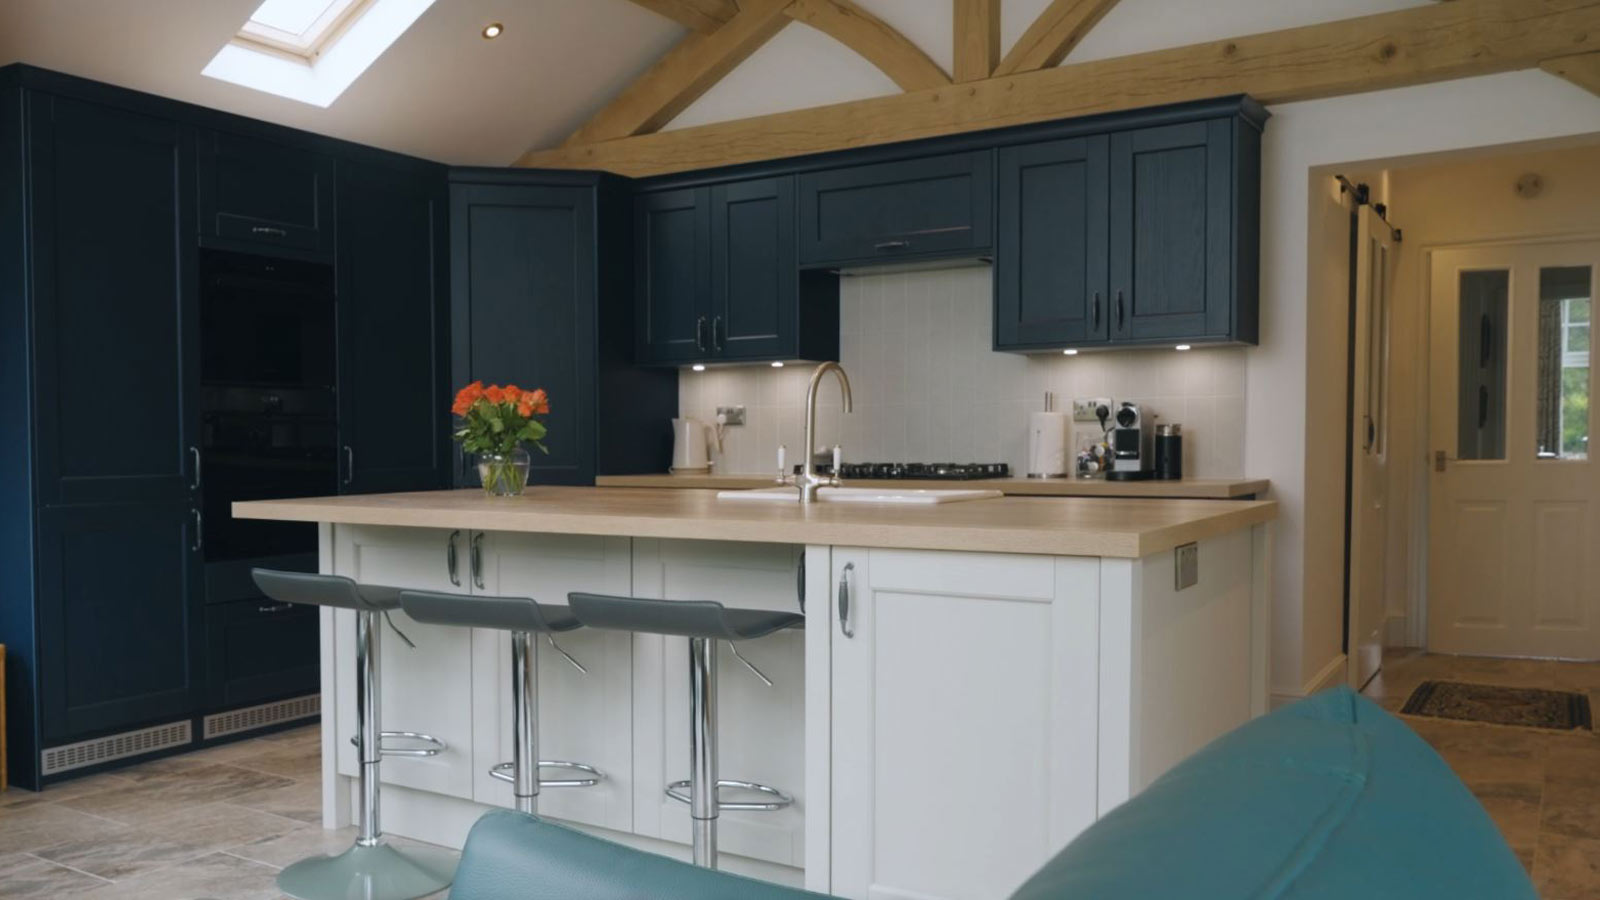 A kitchen makeover with blue kitchen cabinets and a white kitchen island